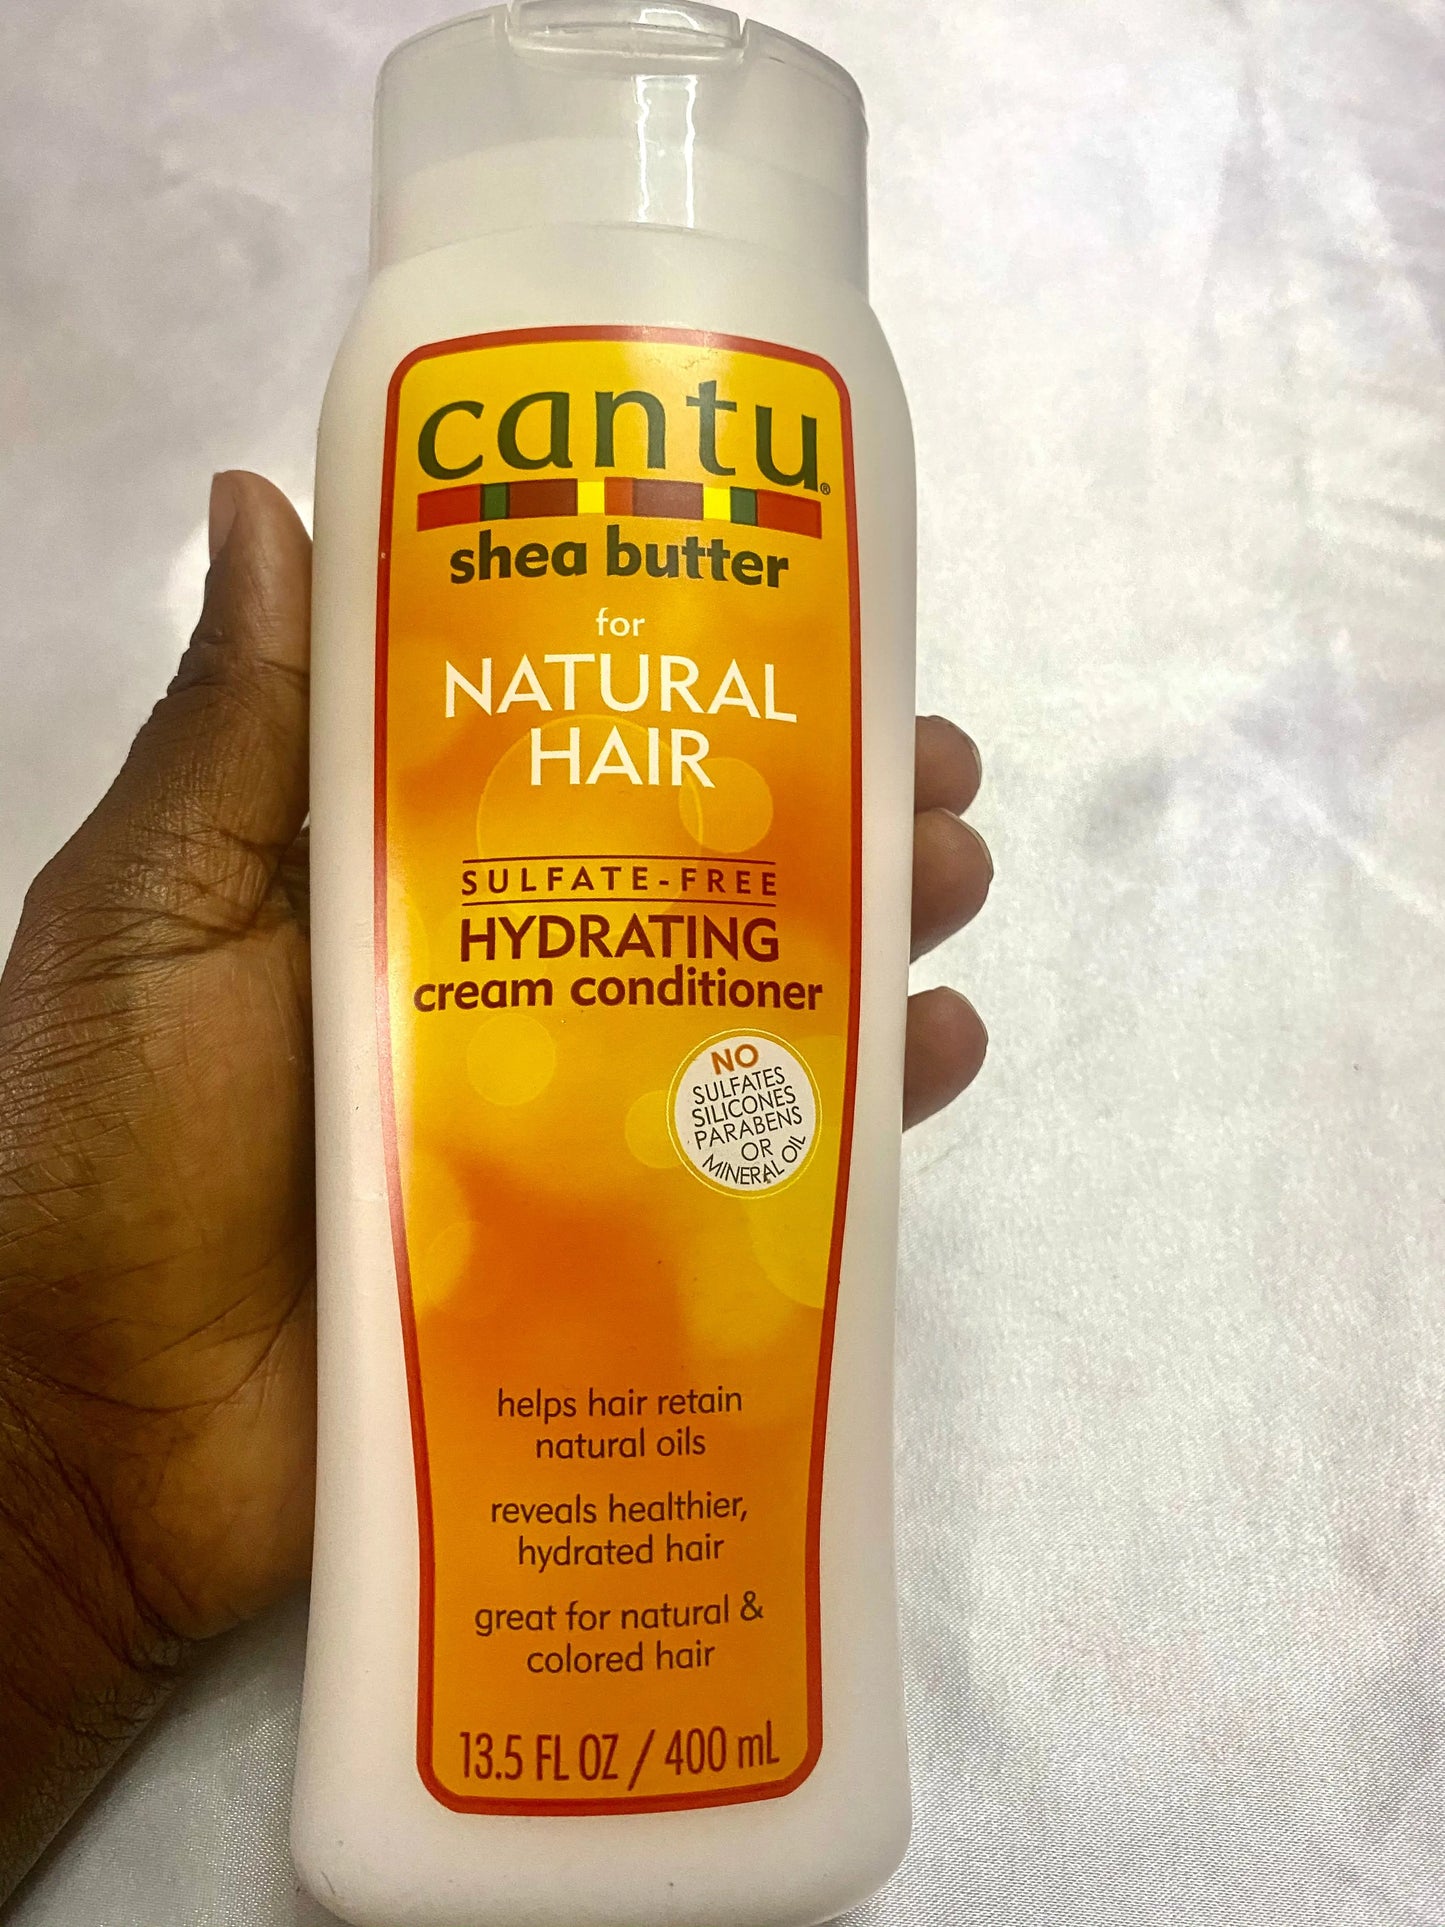 Cantu Shea Butter Natural Hair Hydrating Conditioner La Mimz Beauty & Fashion Store